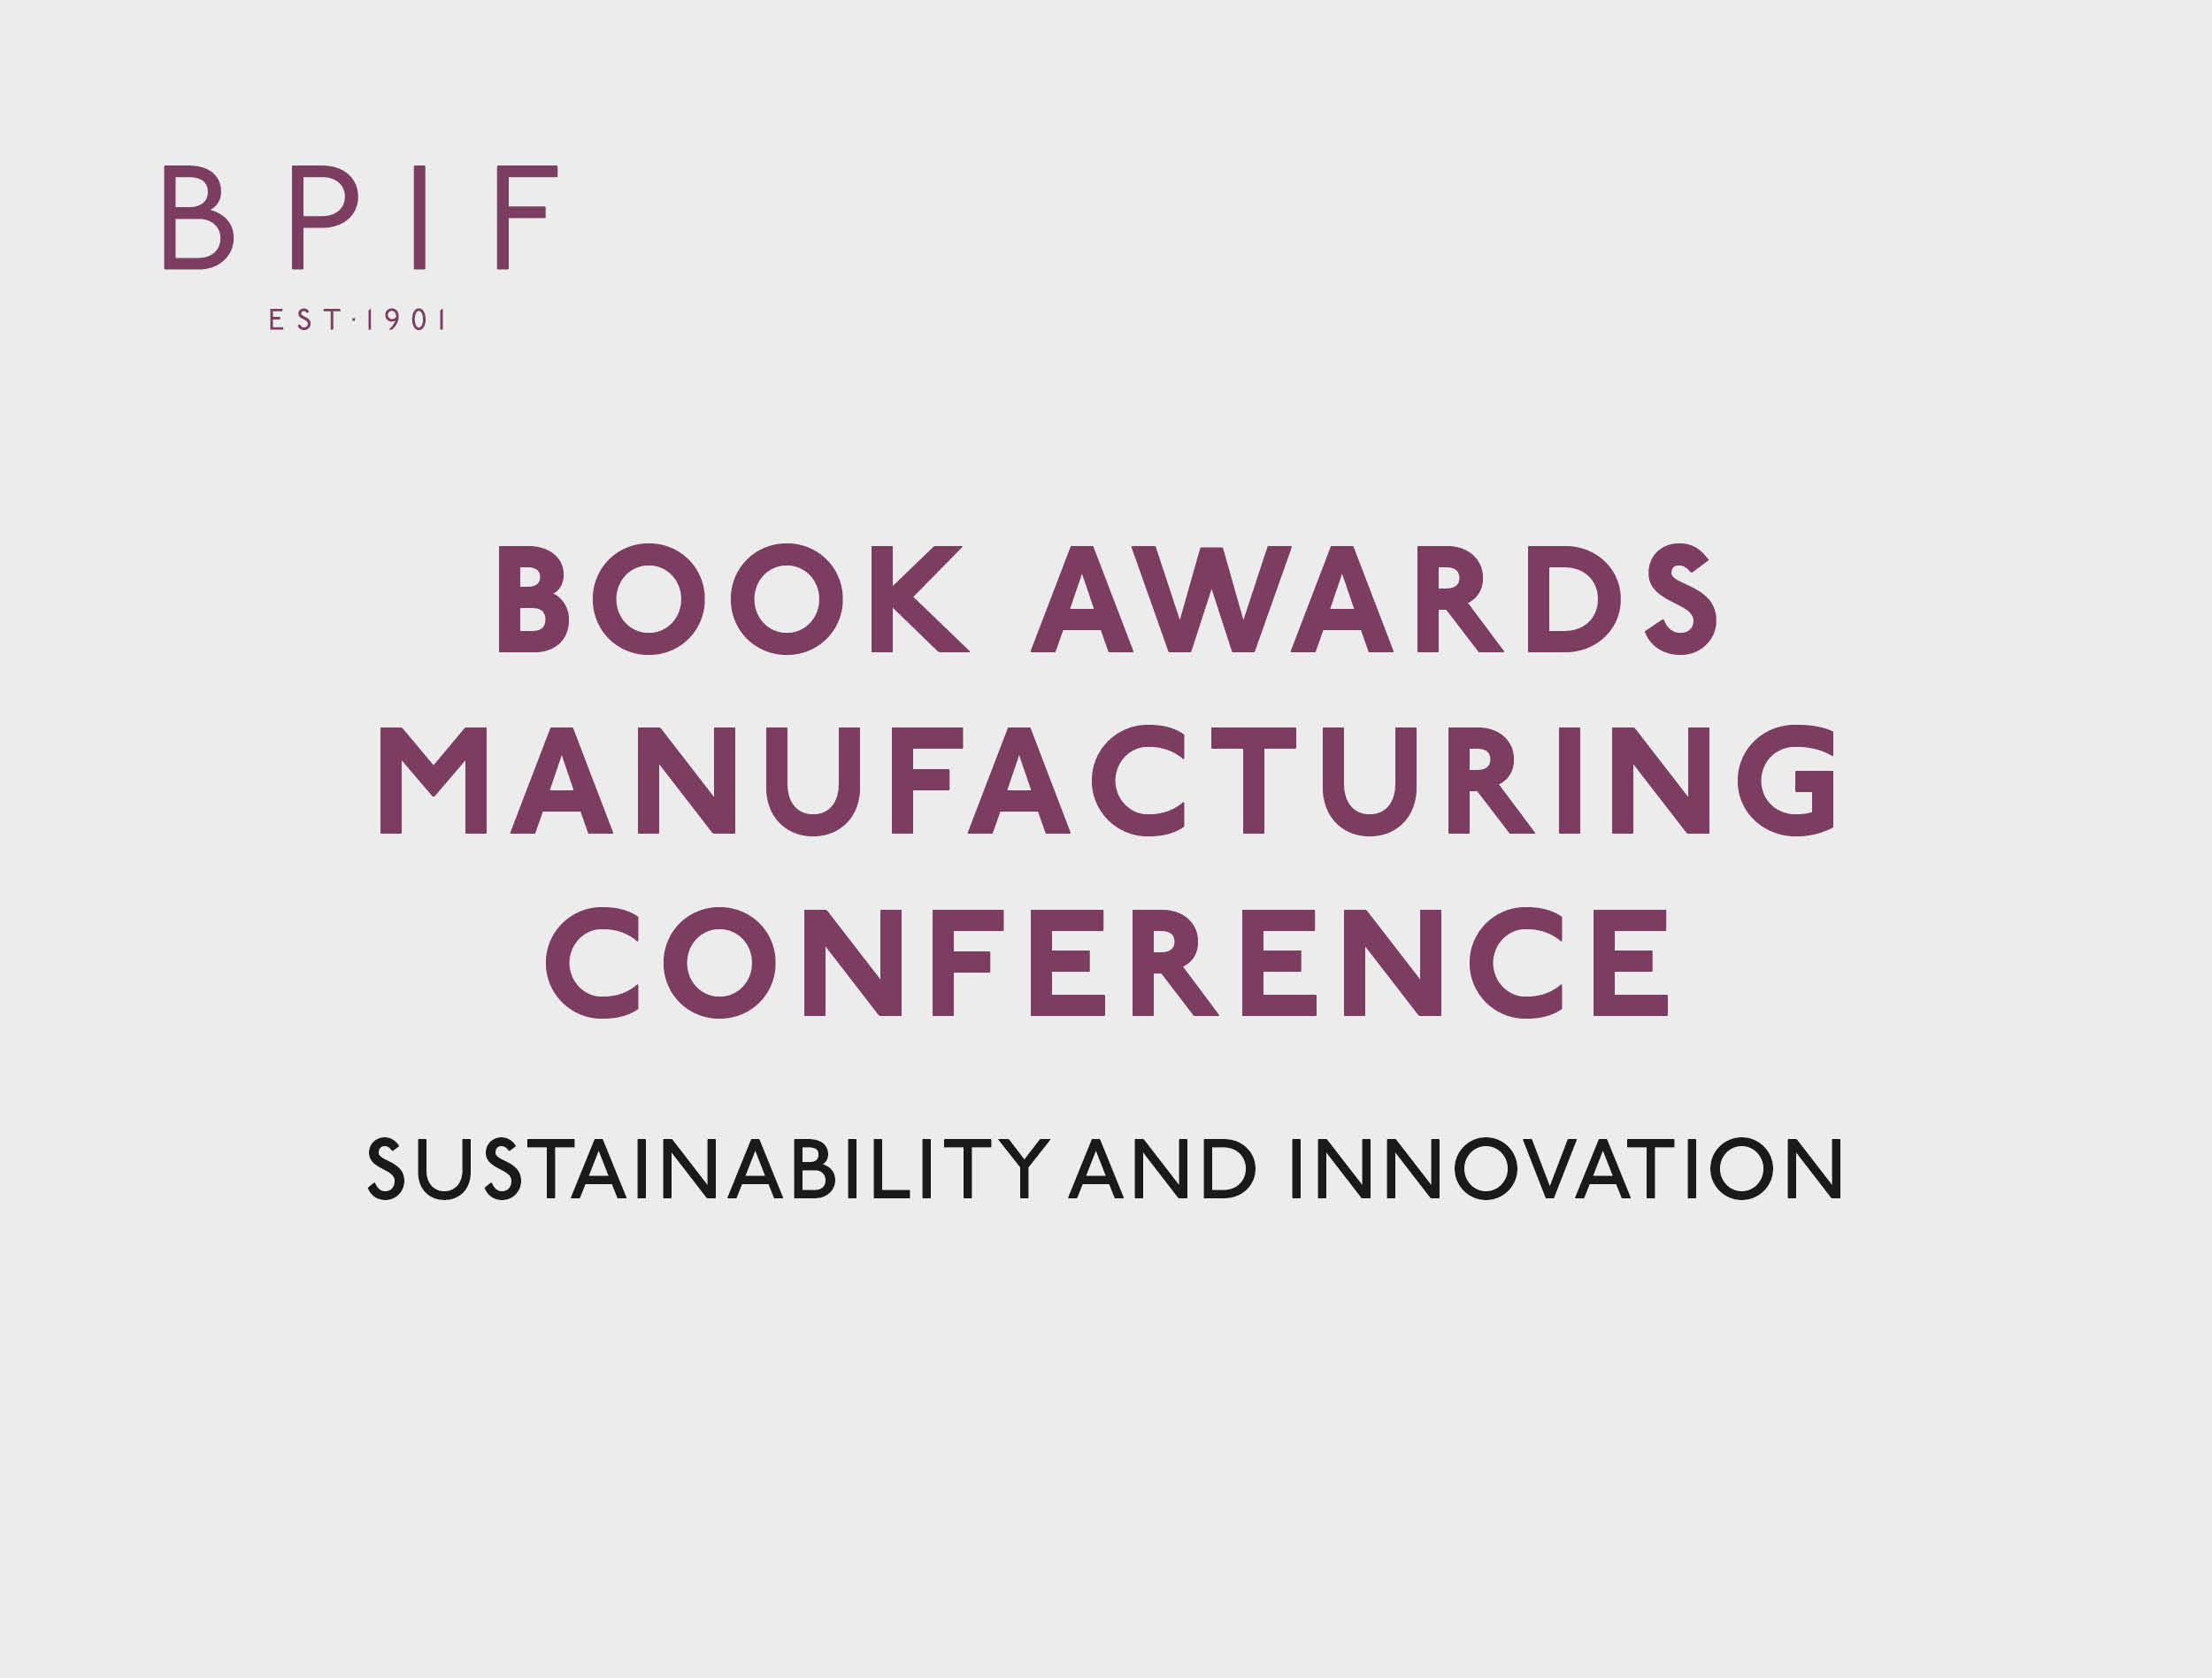 BOOK AWARDS MANUFACTURING CONFERENCE: SUSTAINABILITY AND INNOVATION